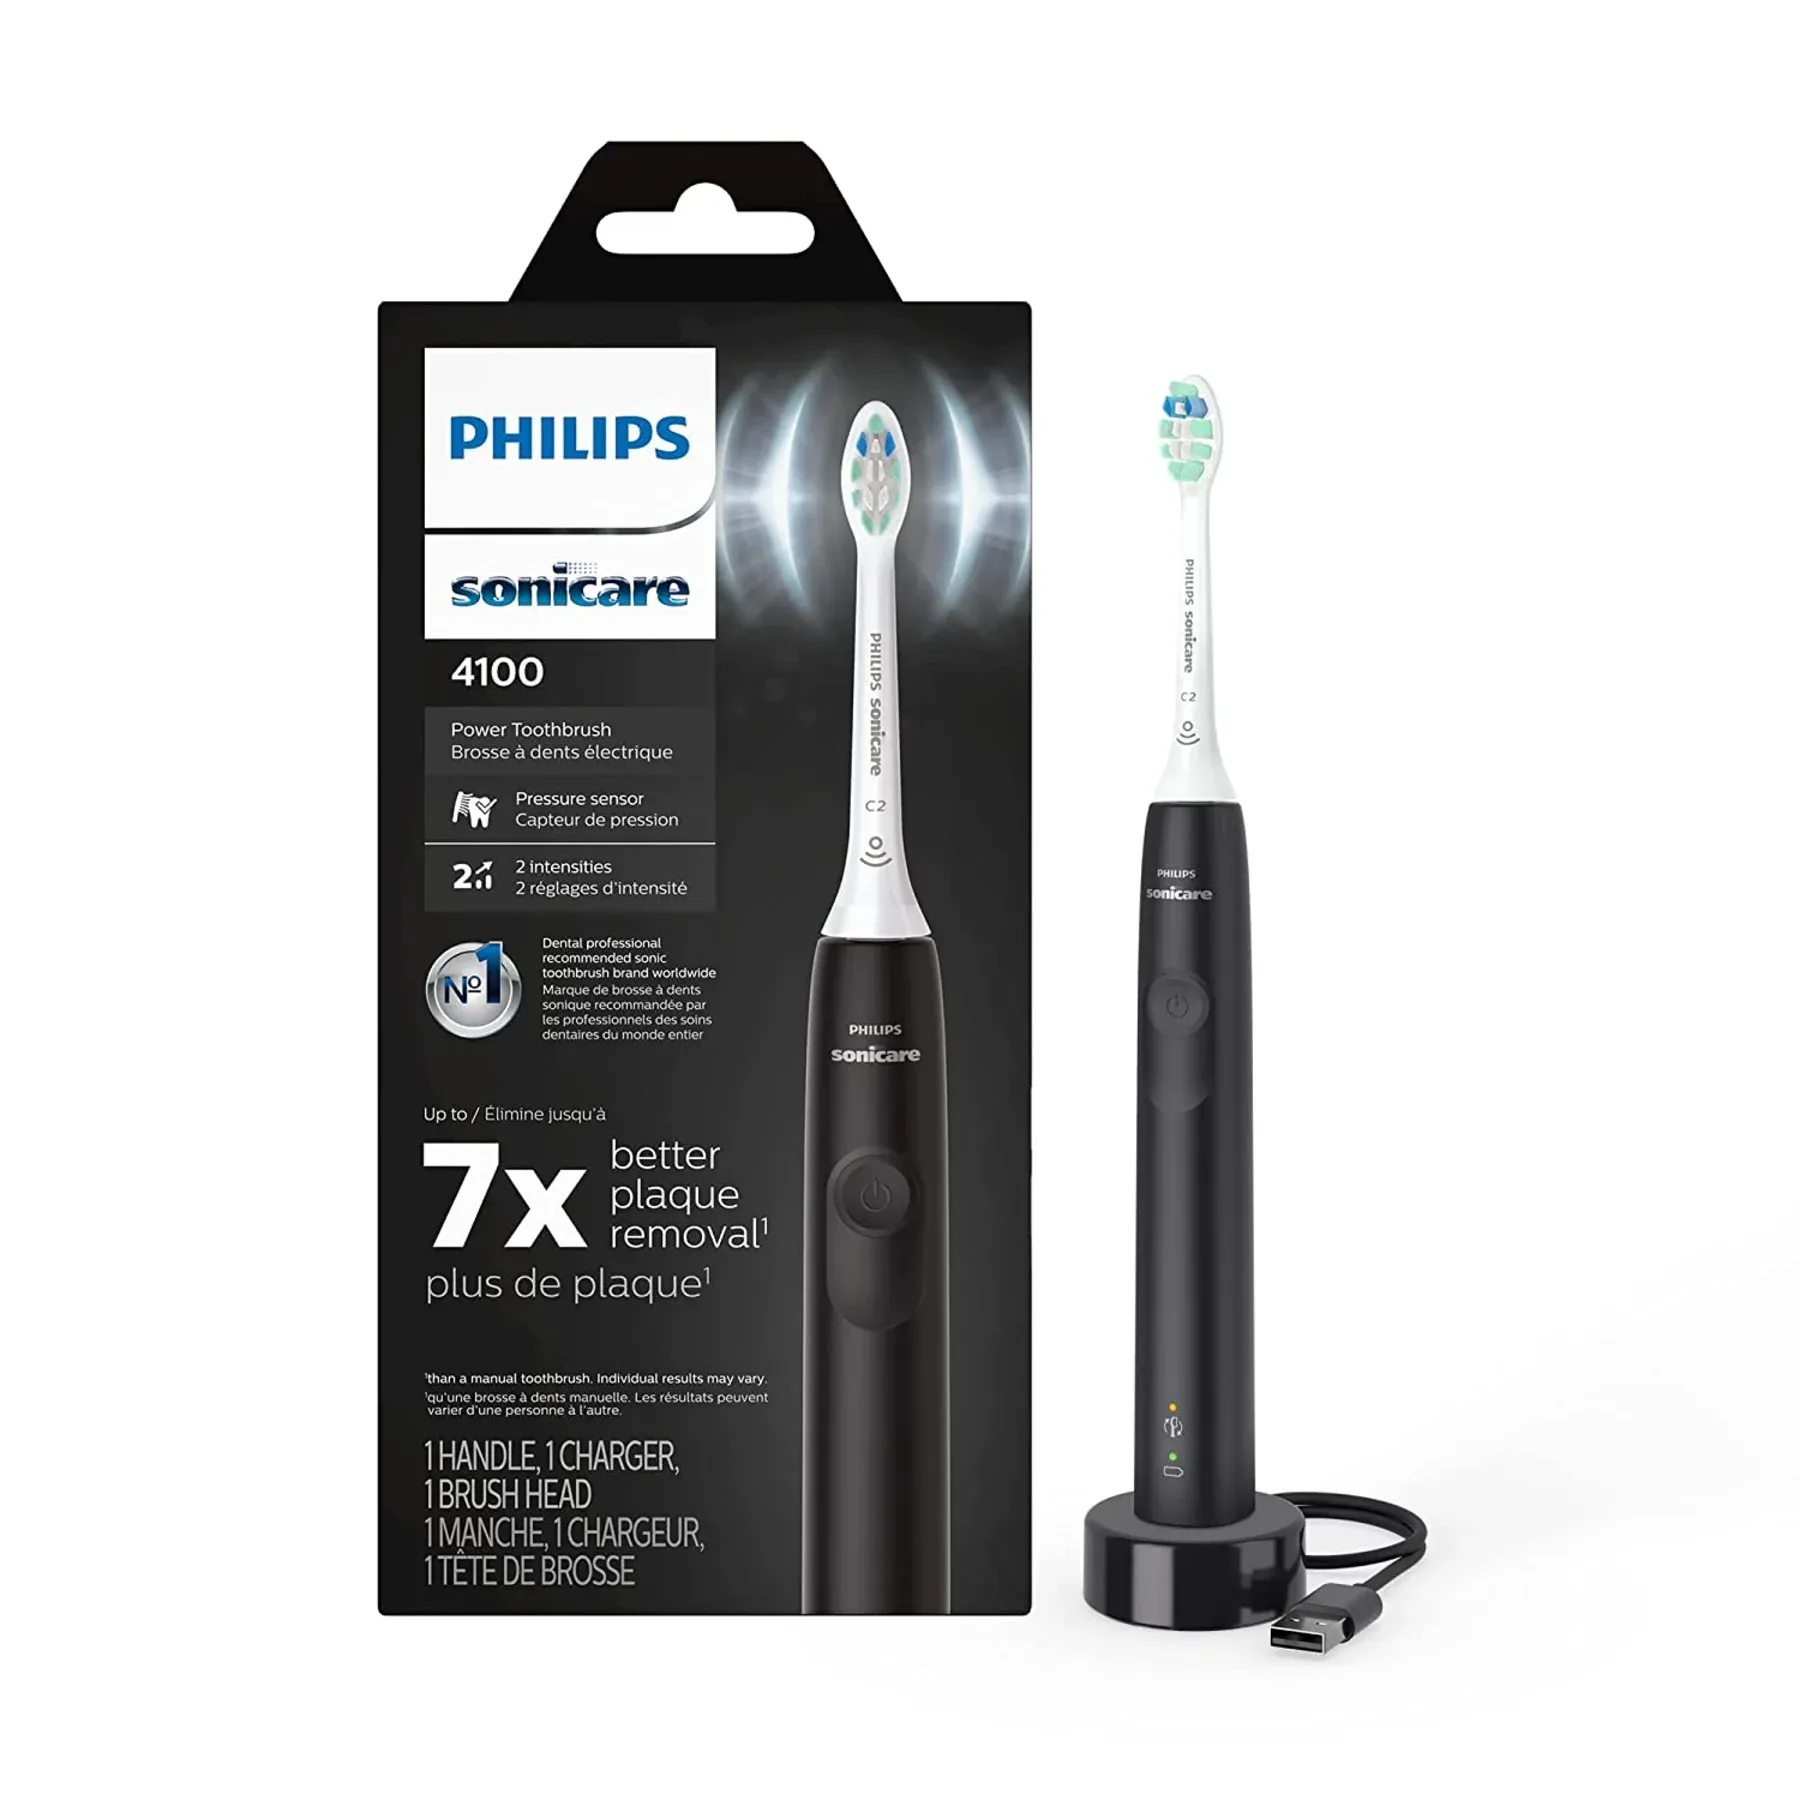 Discover the Gentle Secret: The Best Electric Toothbrush For Sensitive Tooth